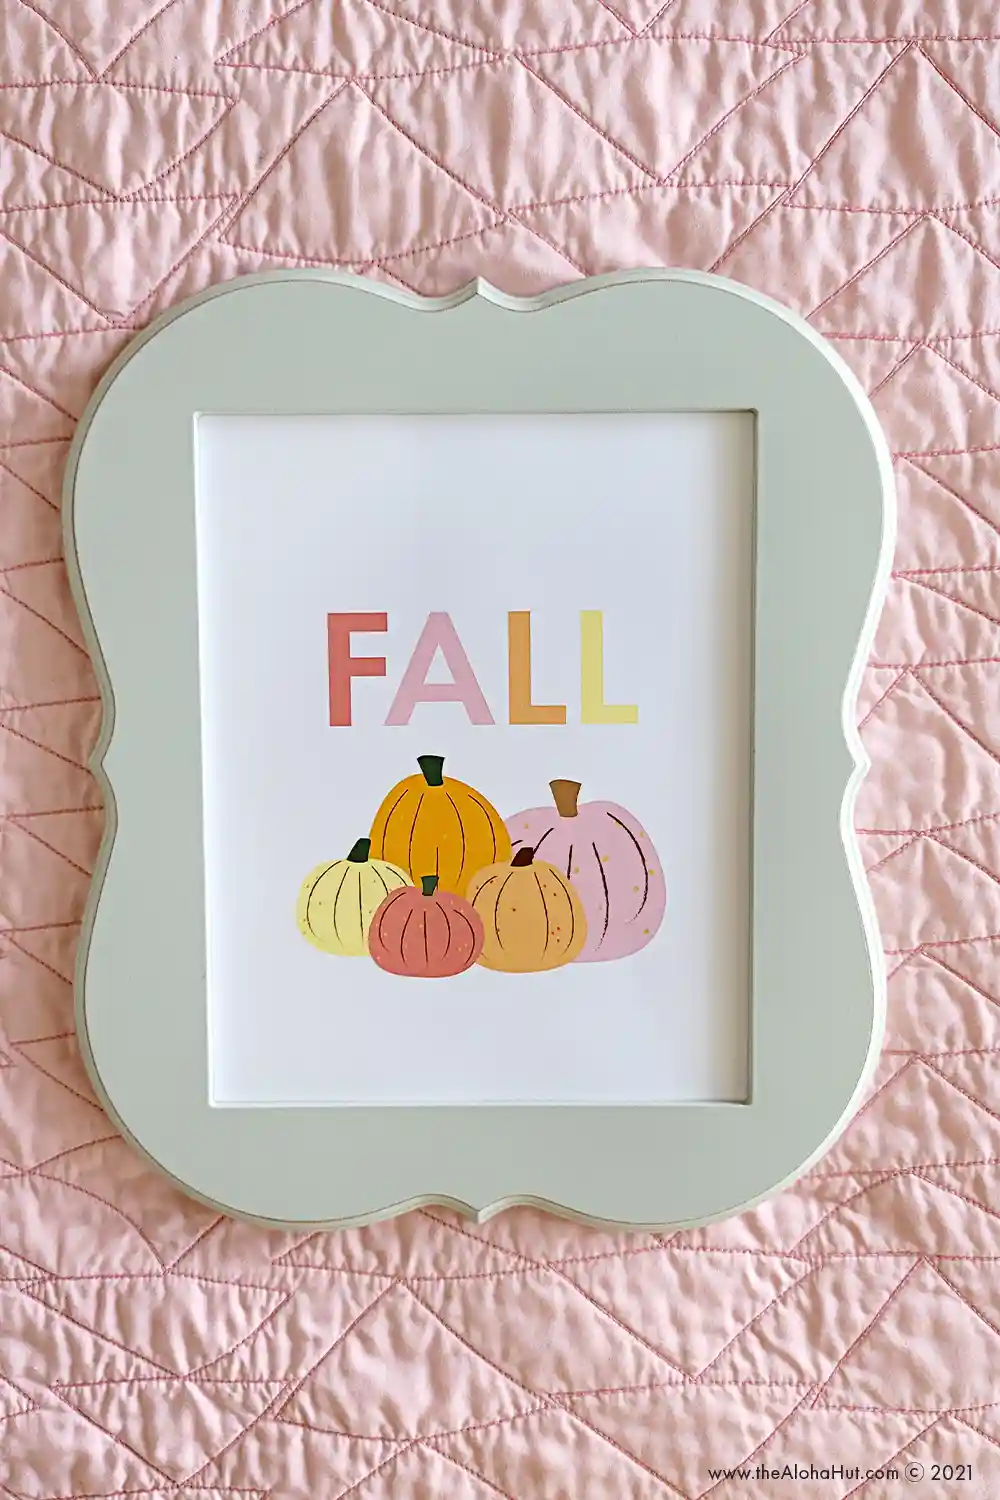 Fall prints that you can easily print at home on a budget. Download our printable Fall decor and easy DIY Thanksgiving Day banners and garlands for budget friendly decoration ideas.